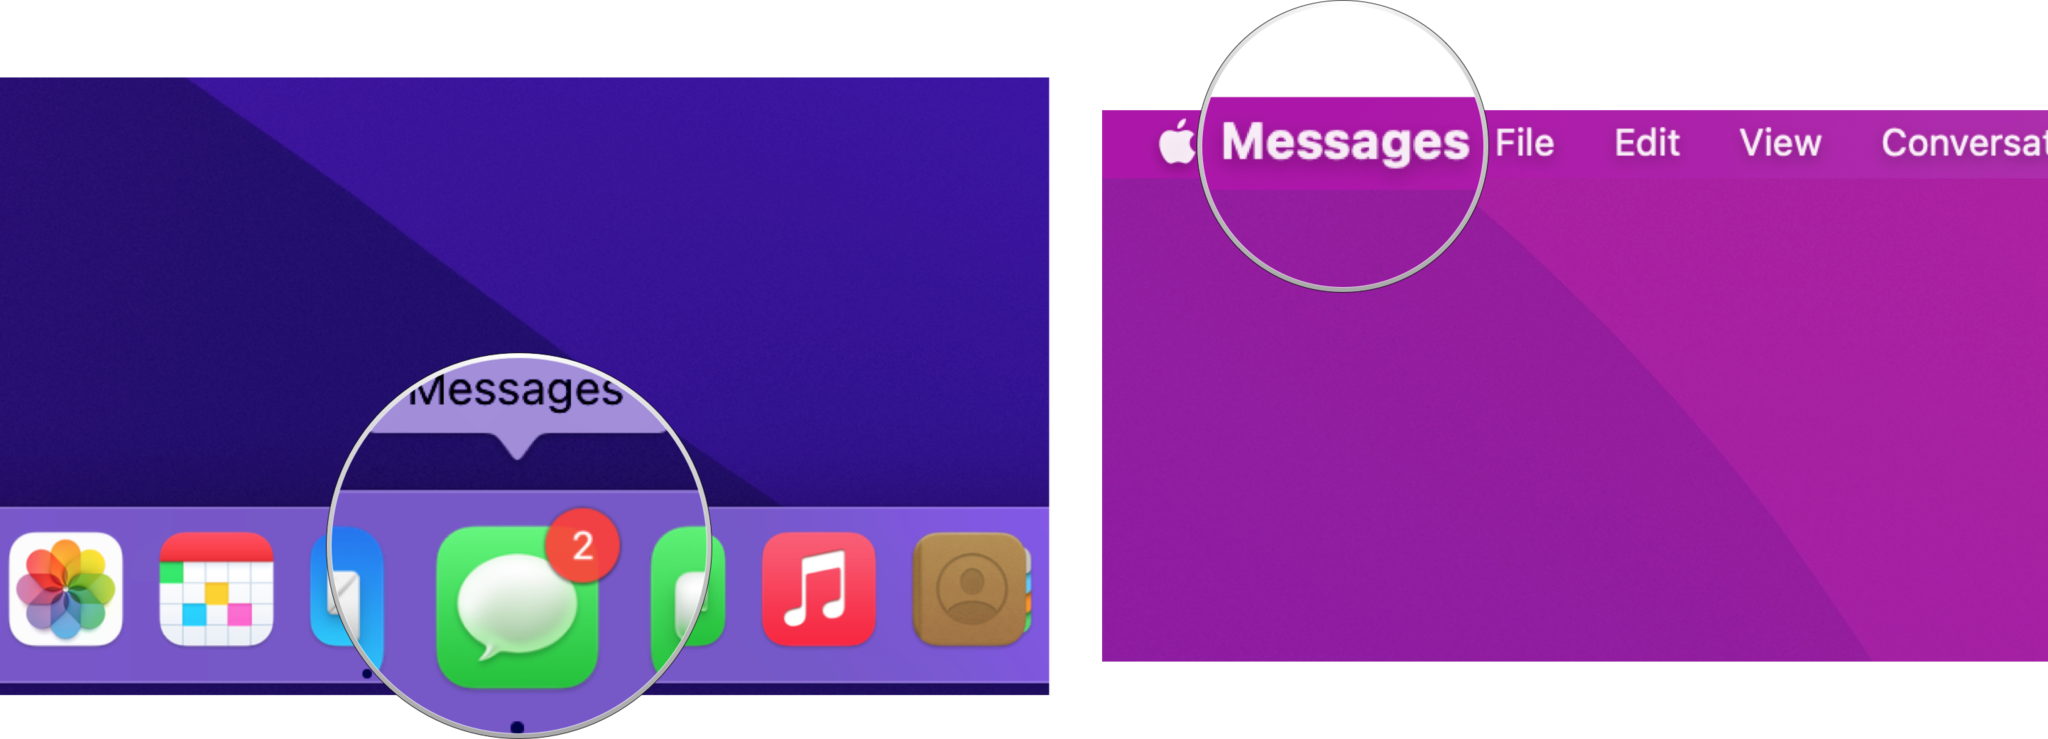 How to Enable Messages in iCloud on Mac: Open Messages, click Messages in the menu bar